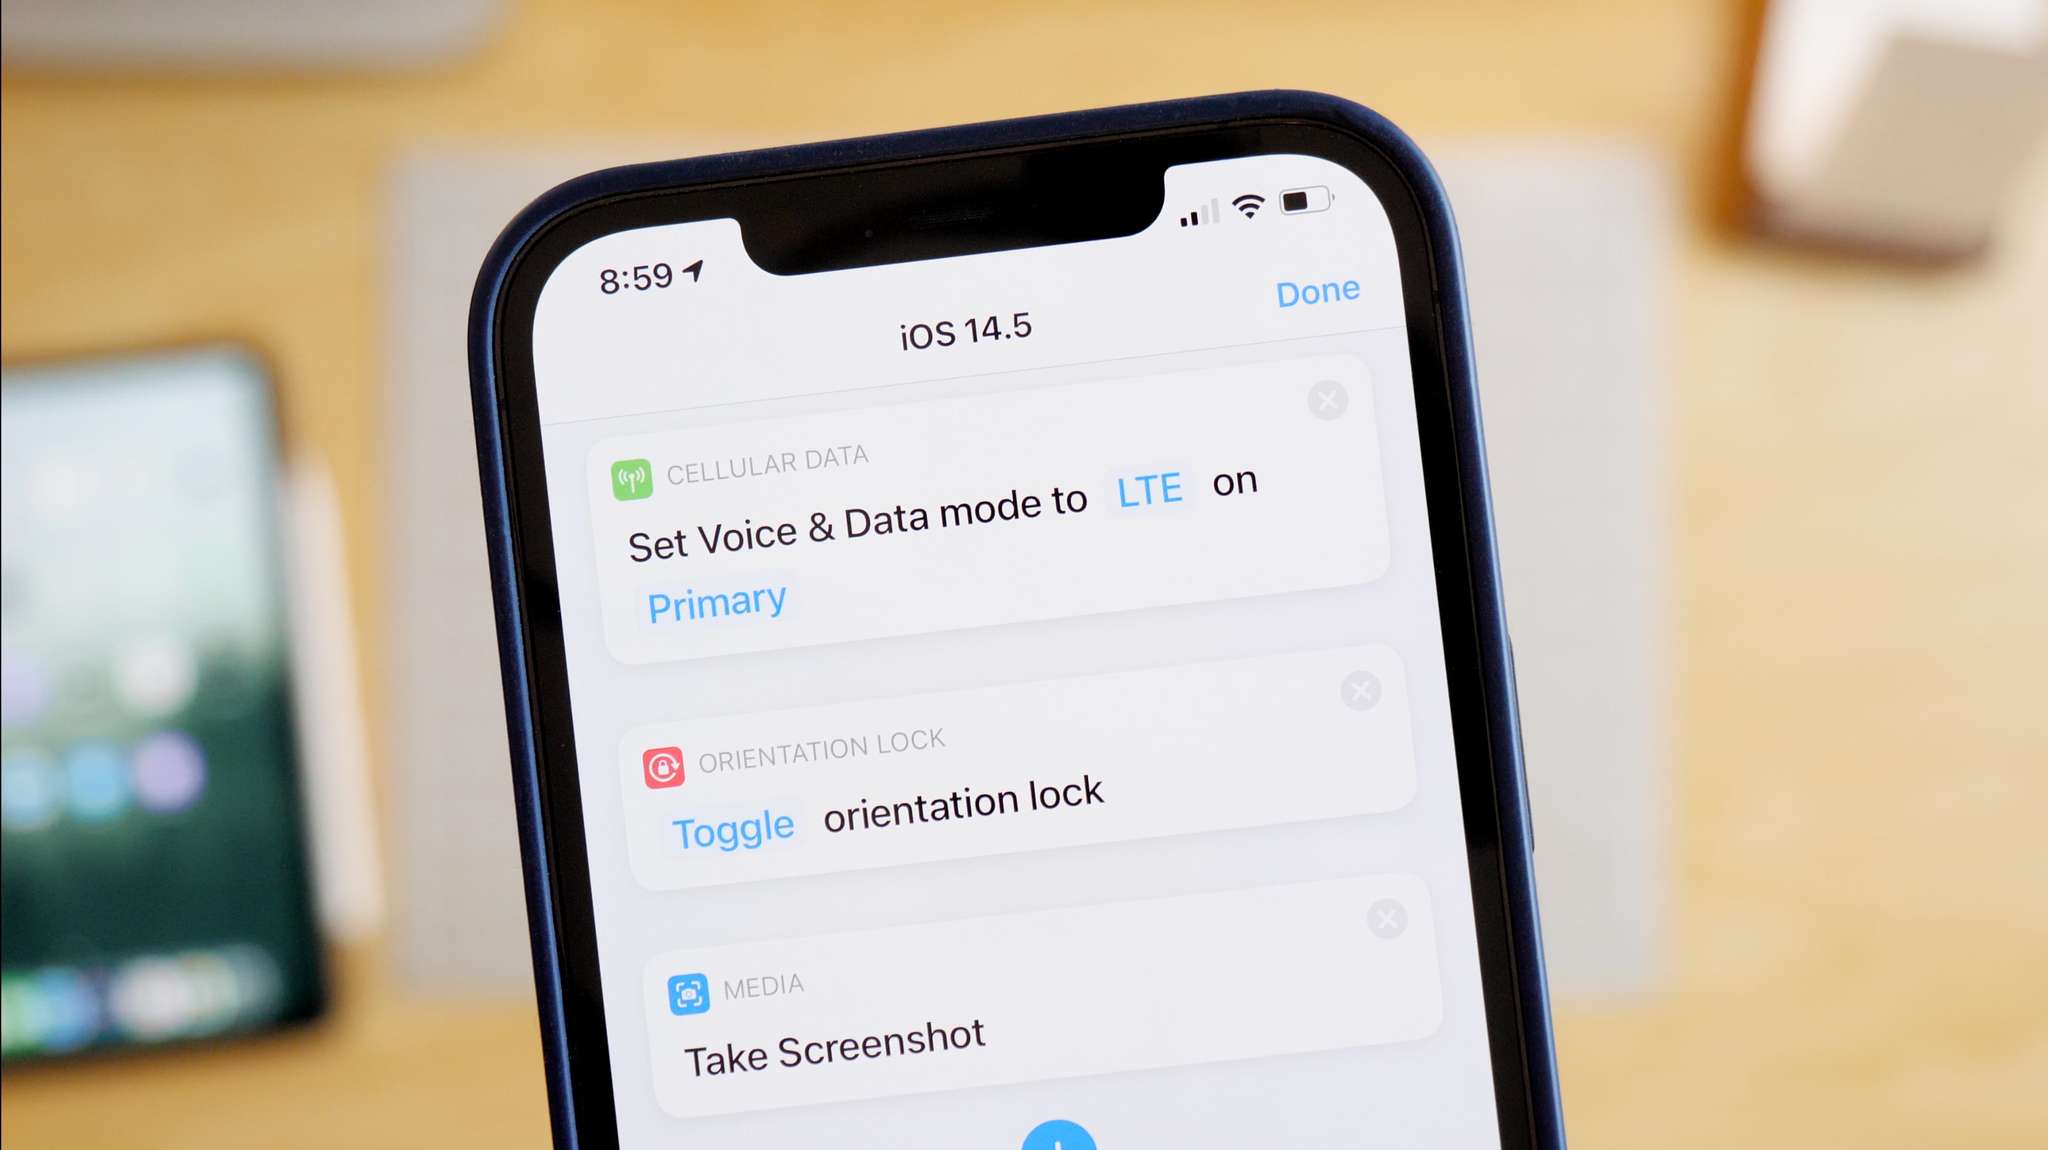 Hero photo of Shortcuts actions new in iOS 14.5 – Set Voice &amp; Data Mode, Set Orientation Lock, and Take Screenshot running on an iPhone above a desk with an iPad, Mac mini, and notecards on the surface